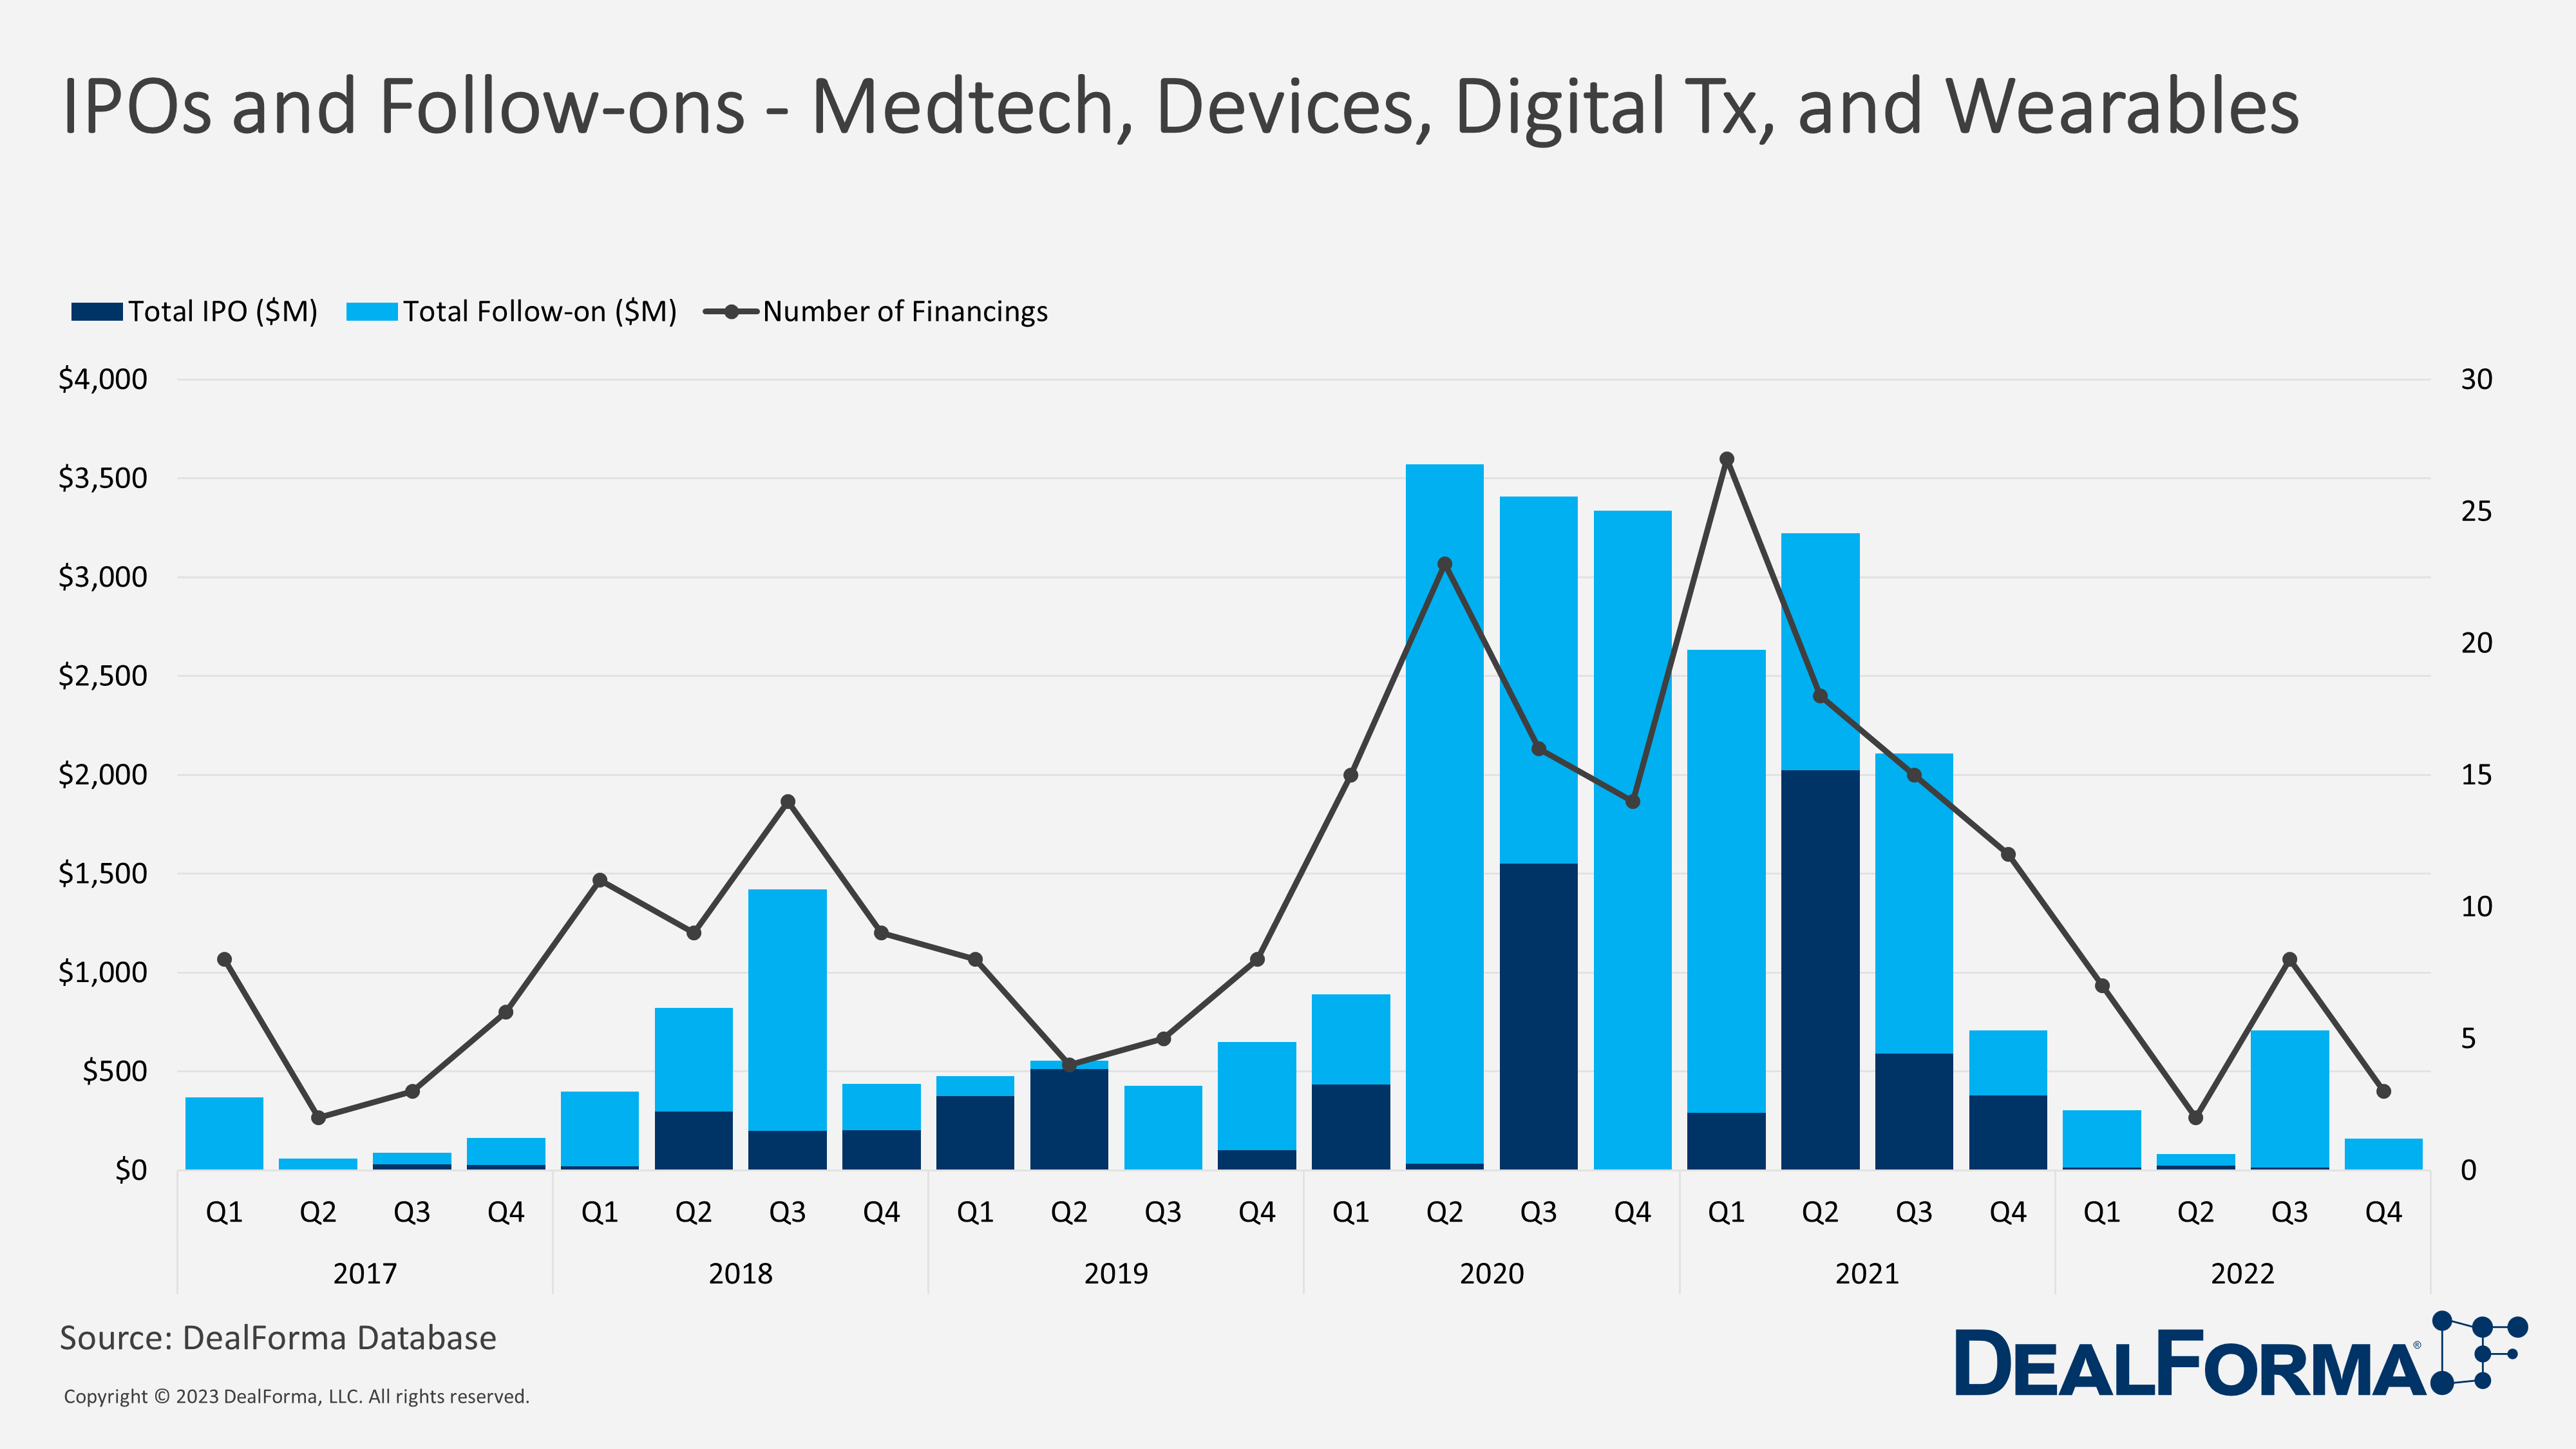 IPOs and Follow-ons - Medtech, Devices, Digital Tx, And Wearables